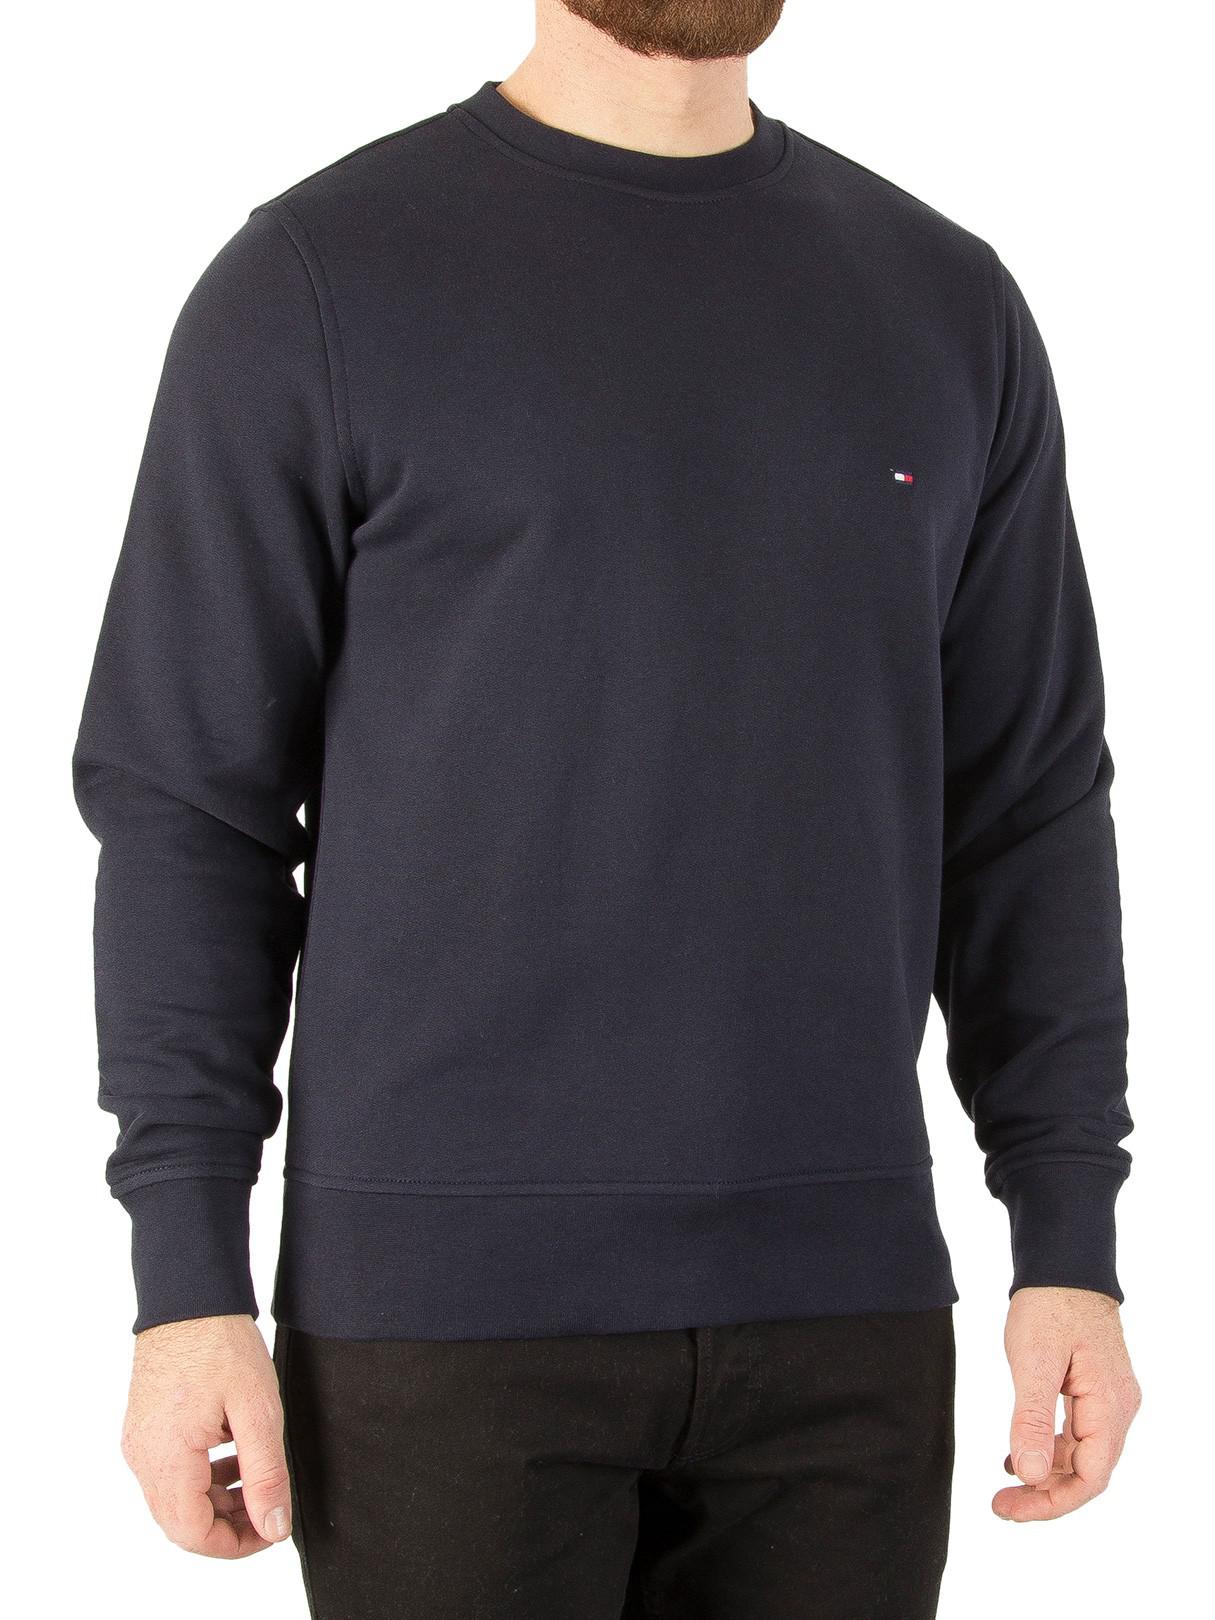 Sky Captain Tommy Hilfiger Discount, 53% OFF | pwdnutrition.com